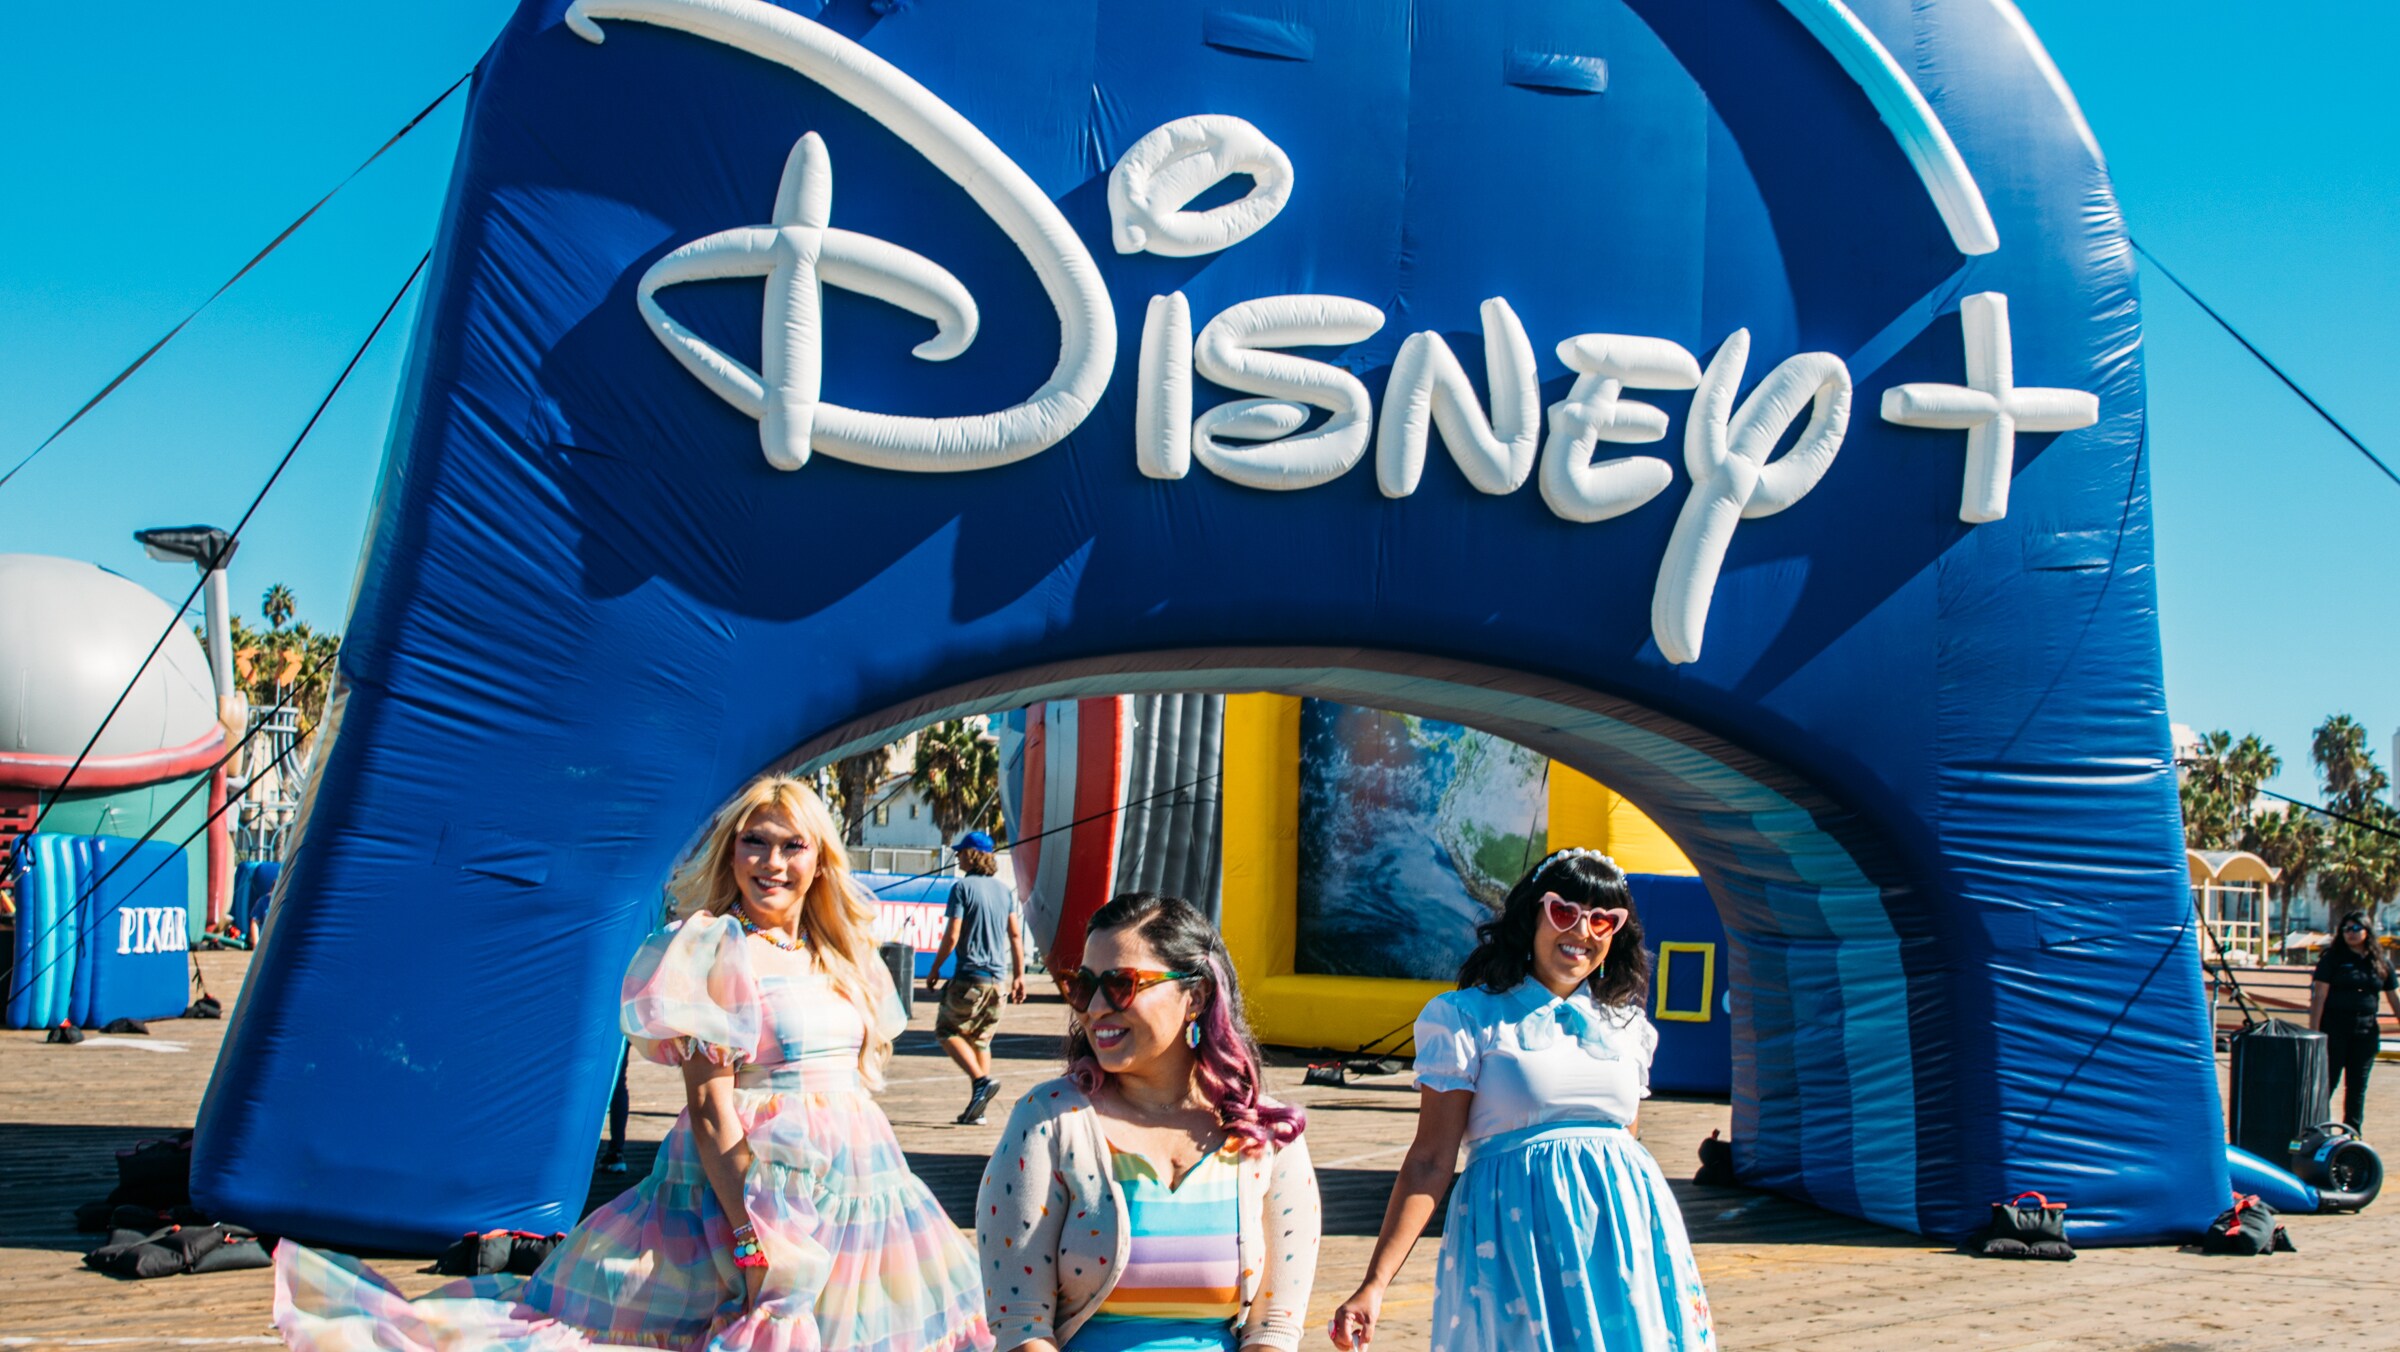 Disney+ Day Inflatable Balloon Tour - Los Angeles